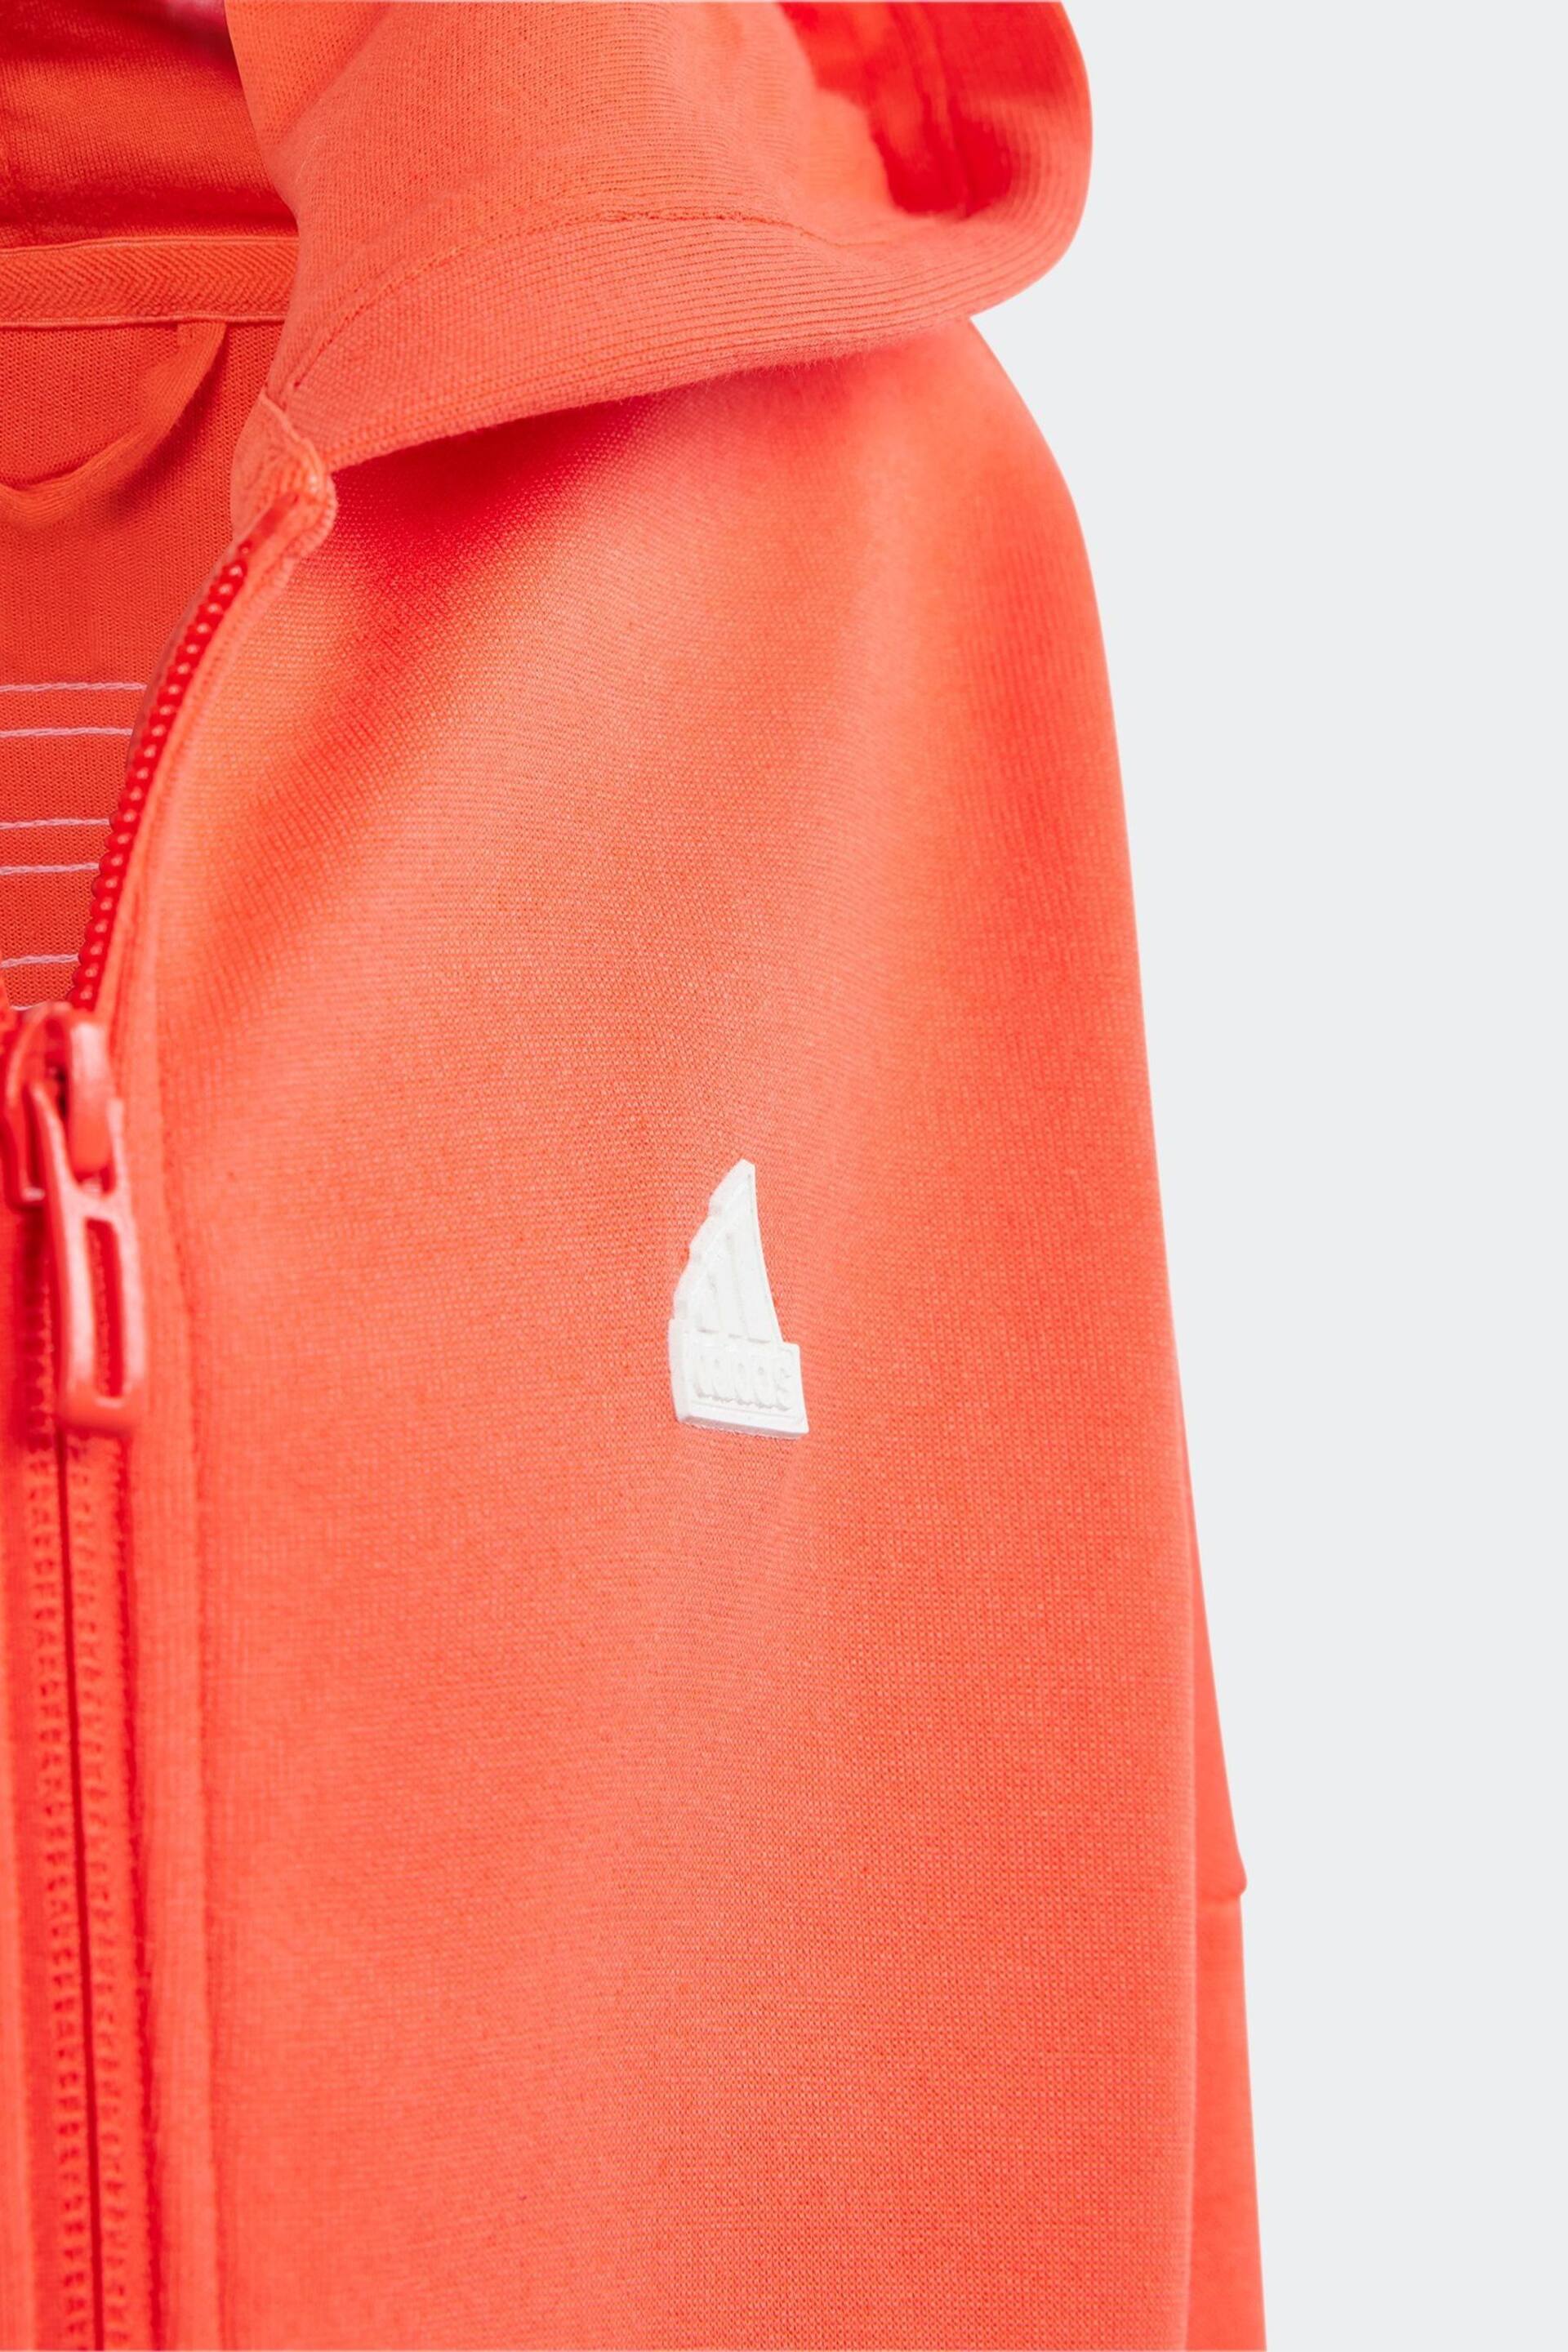 adidas Red Sportswear Future Icons 3-Stripes Full-Zip Hooded Track Top - Image 3 of 5